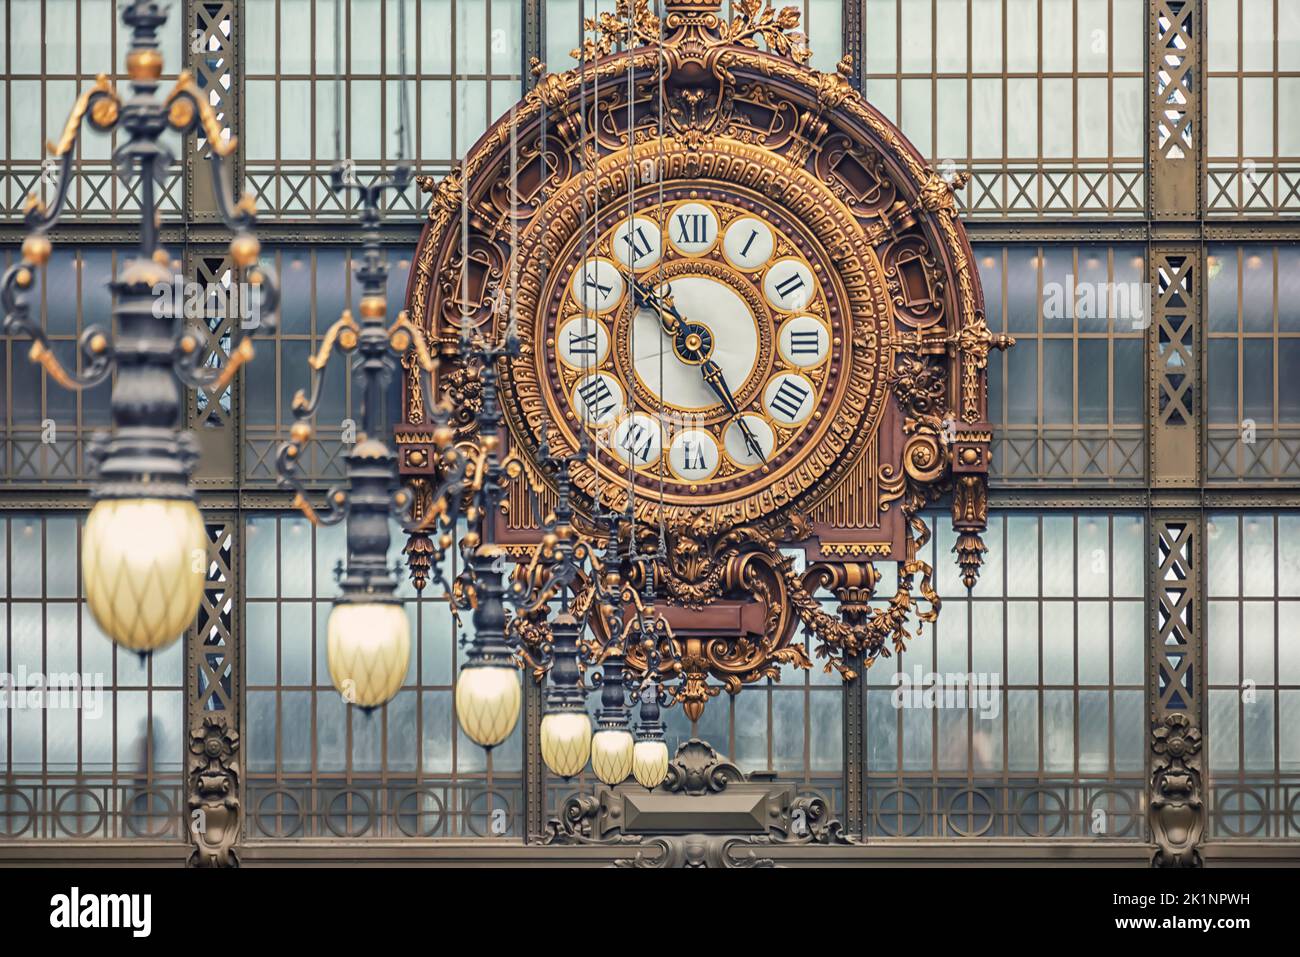 Huge clock in an ancient train station in Paris city Stock Photo